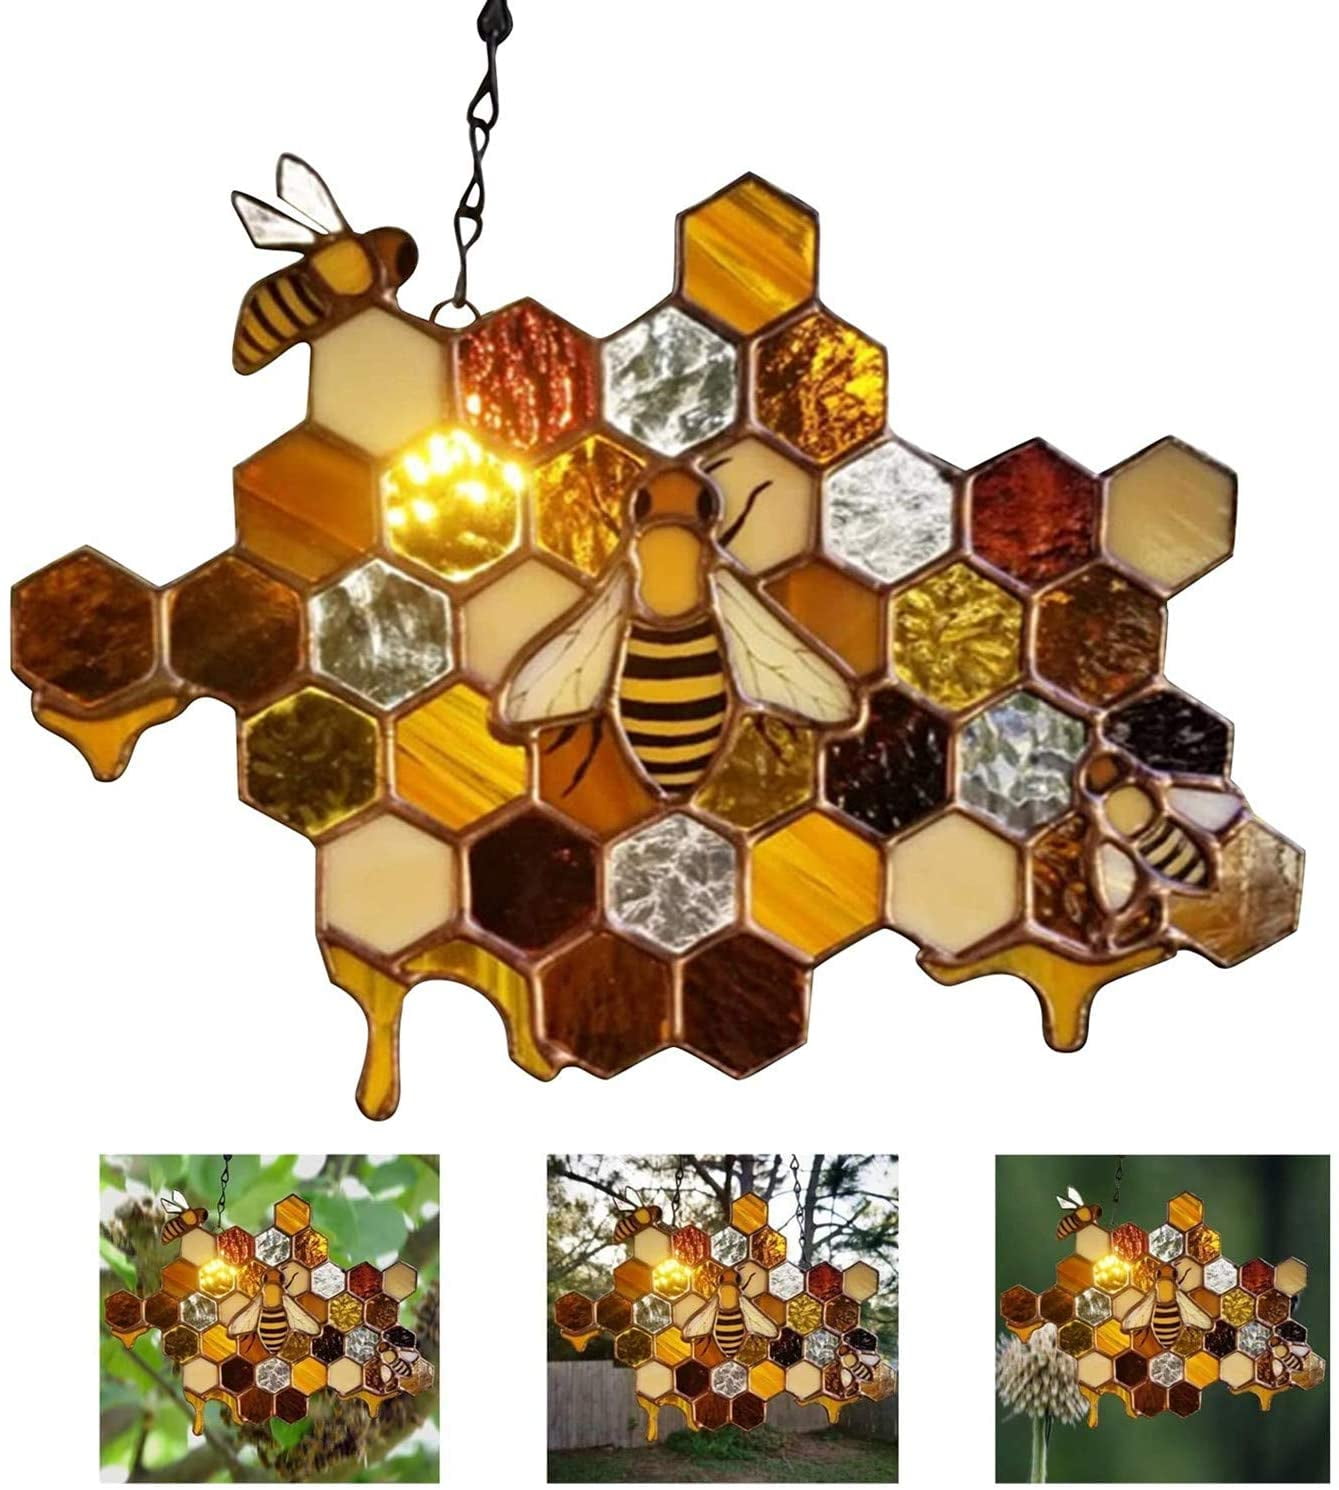 Trapezoid Amber Bee Window Sun Catcher Ornament,Spring Summer Garden Art Decoration Gifts for Mothers Day//Birthday//Housewarming Naladoo Bee Honeycomb Hanging Decor